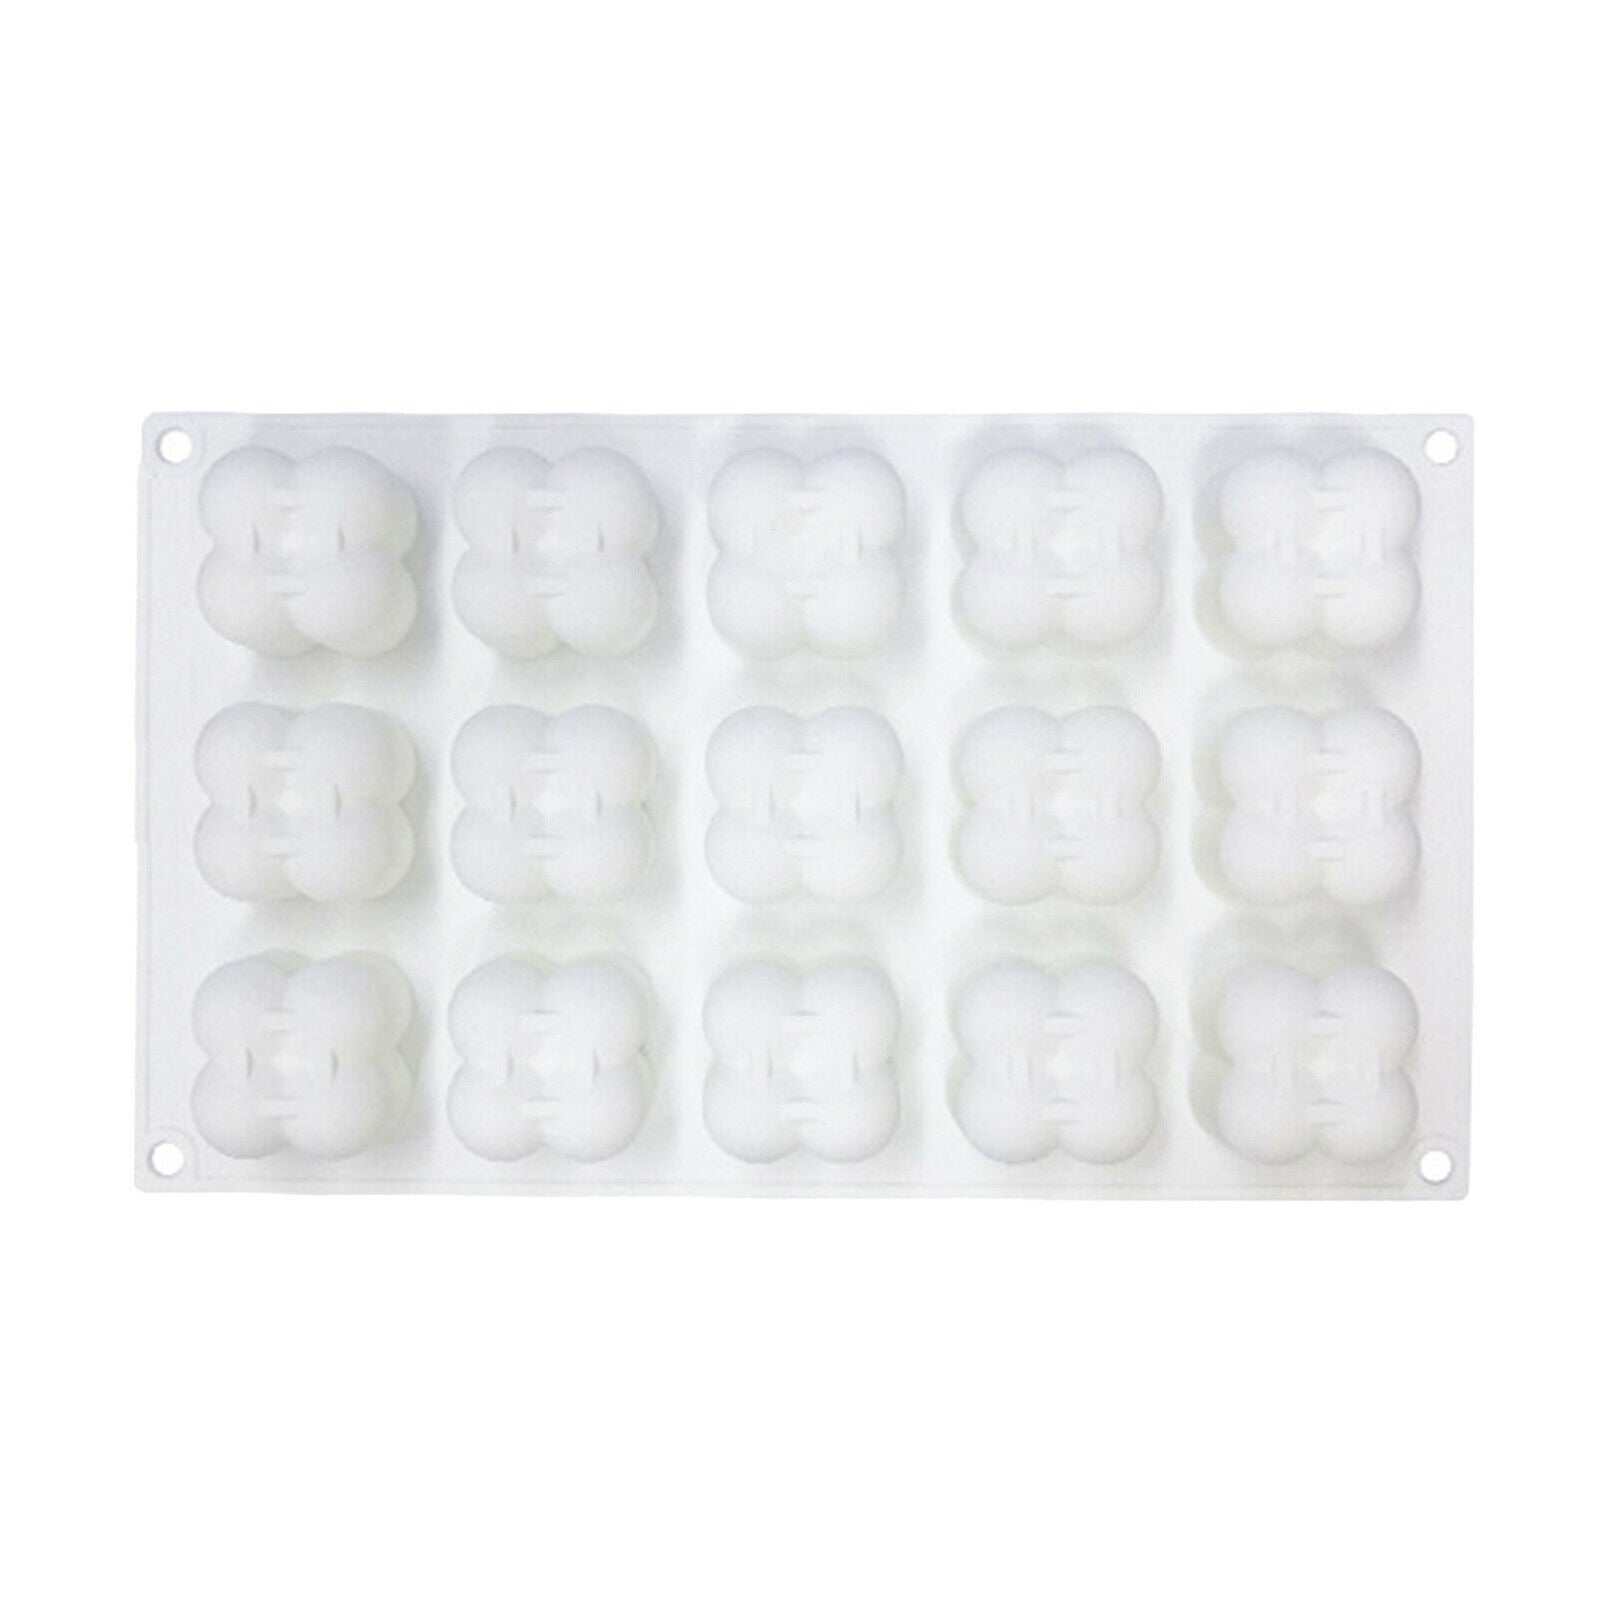 15-in-1 Silicone Candle Mold Mini Bubble Cube Ball Design for Candles DIY Crafts